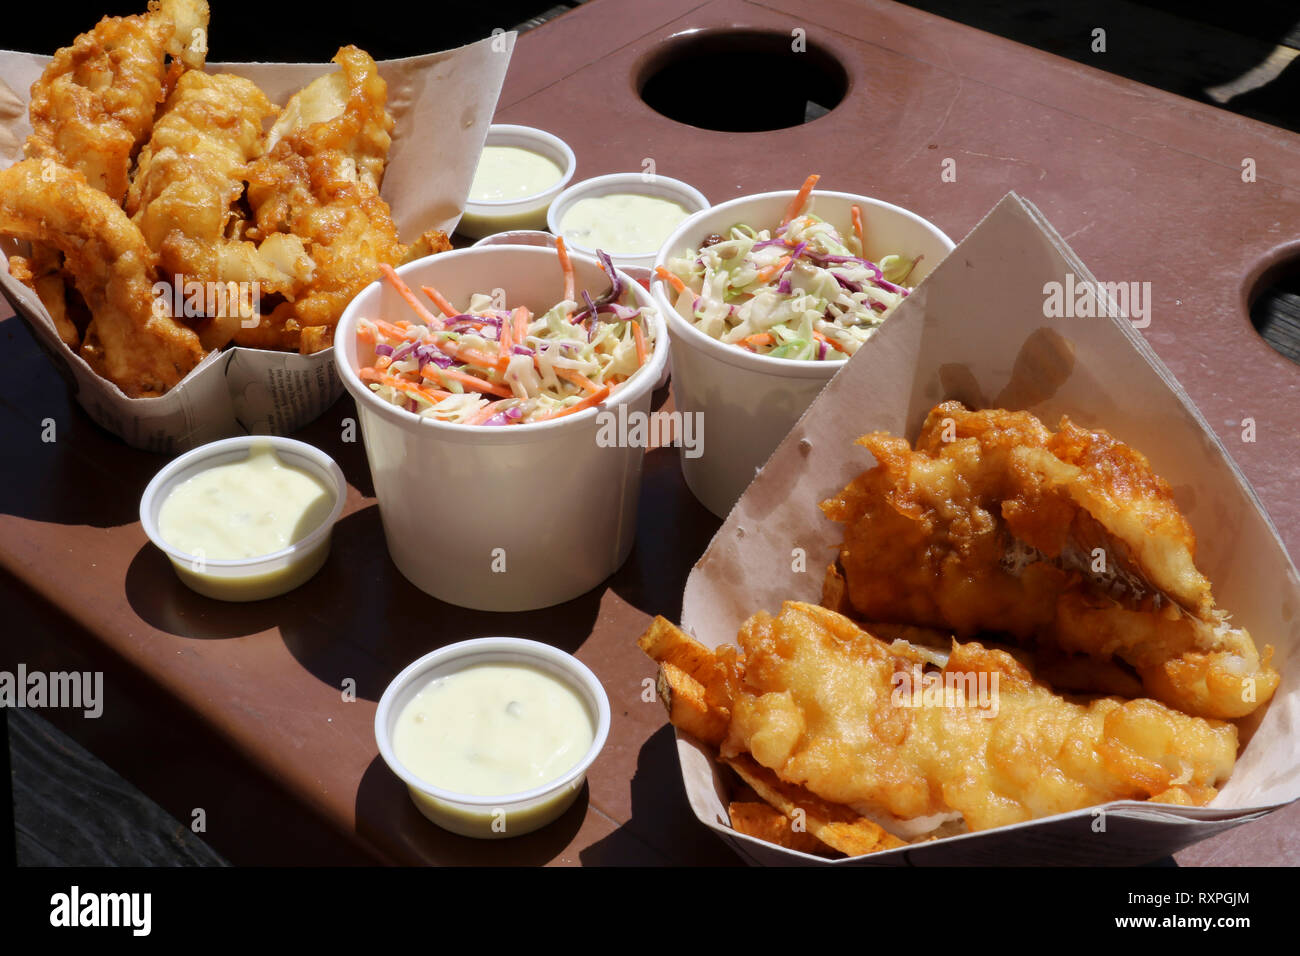 Enjoy tasty fish and chips with coleslaw and tartar sauce at the beach on a sunny day. Stock Photo